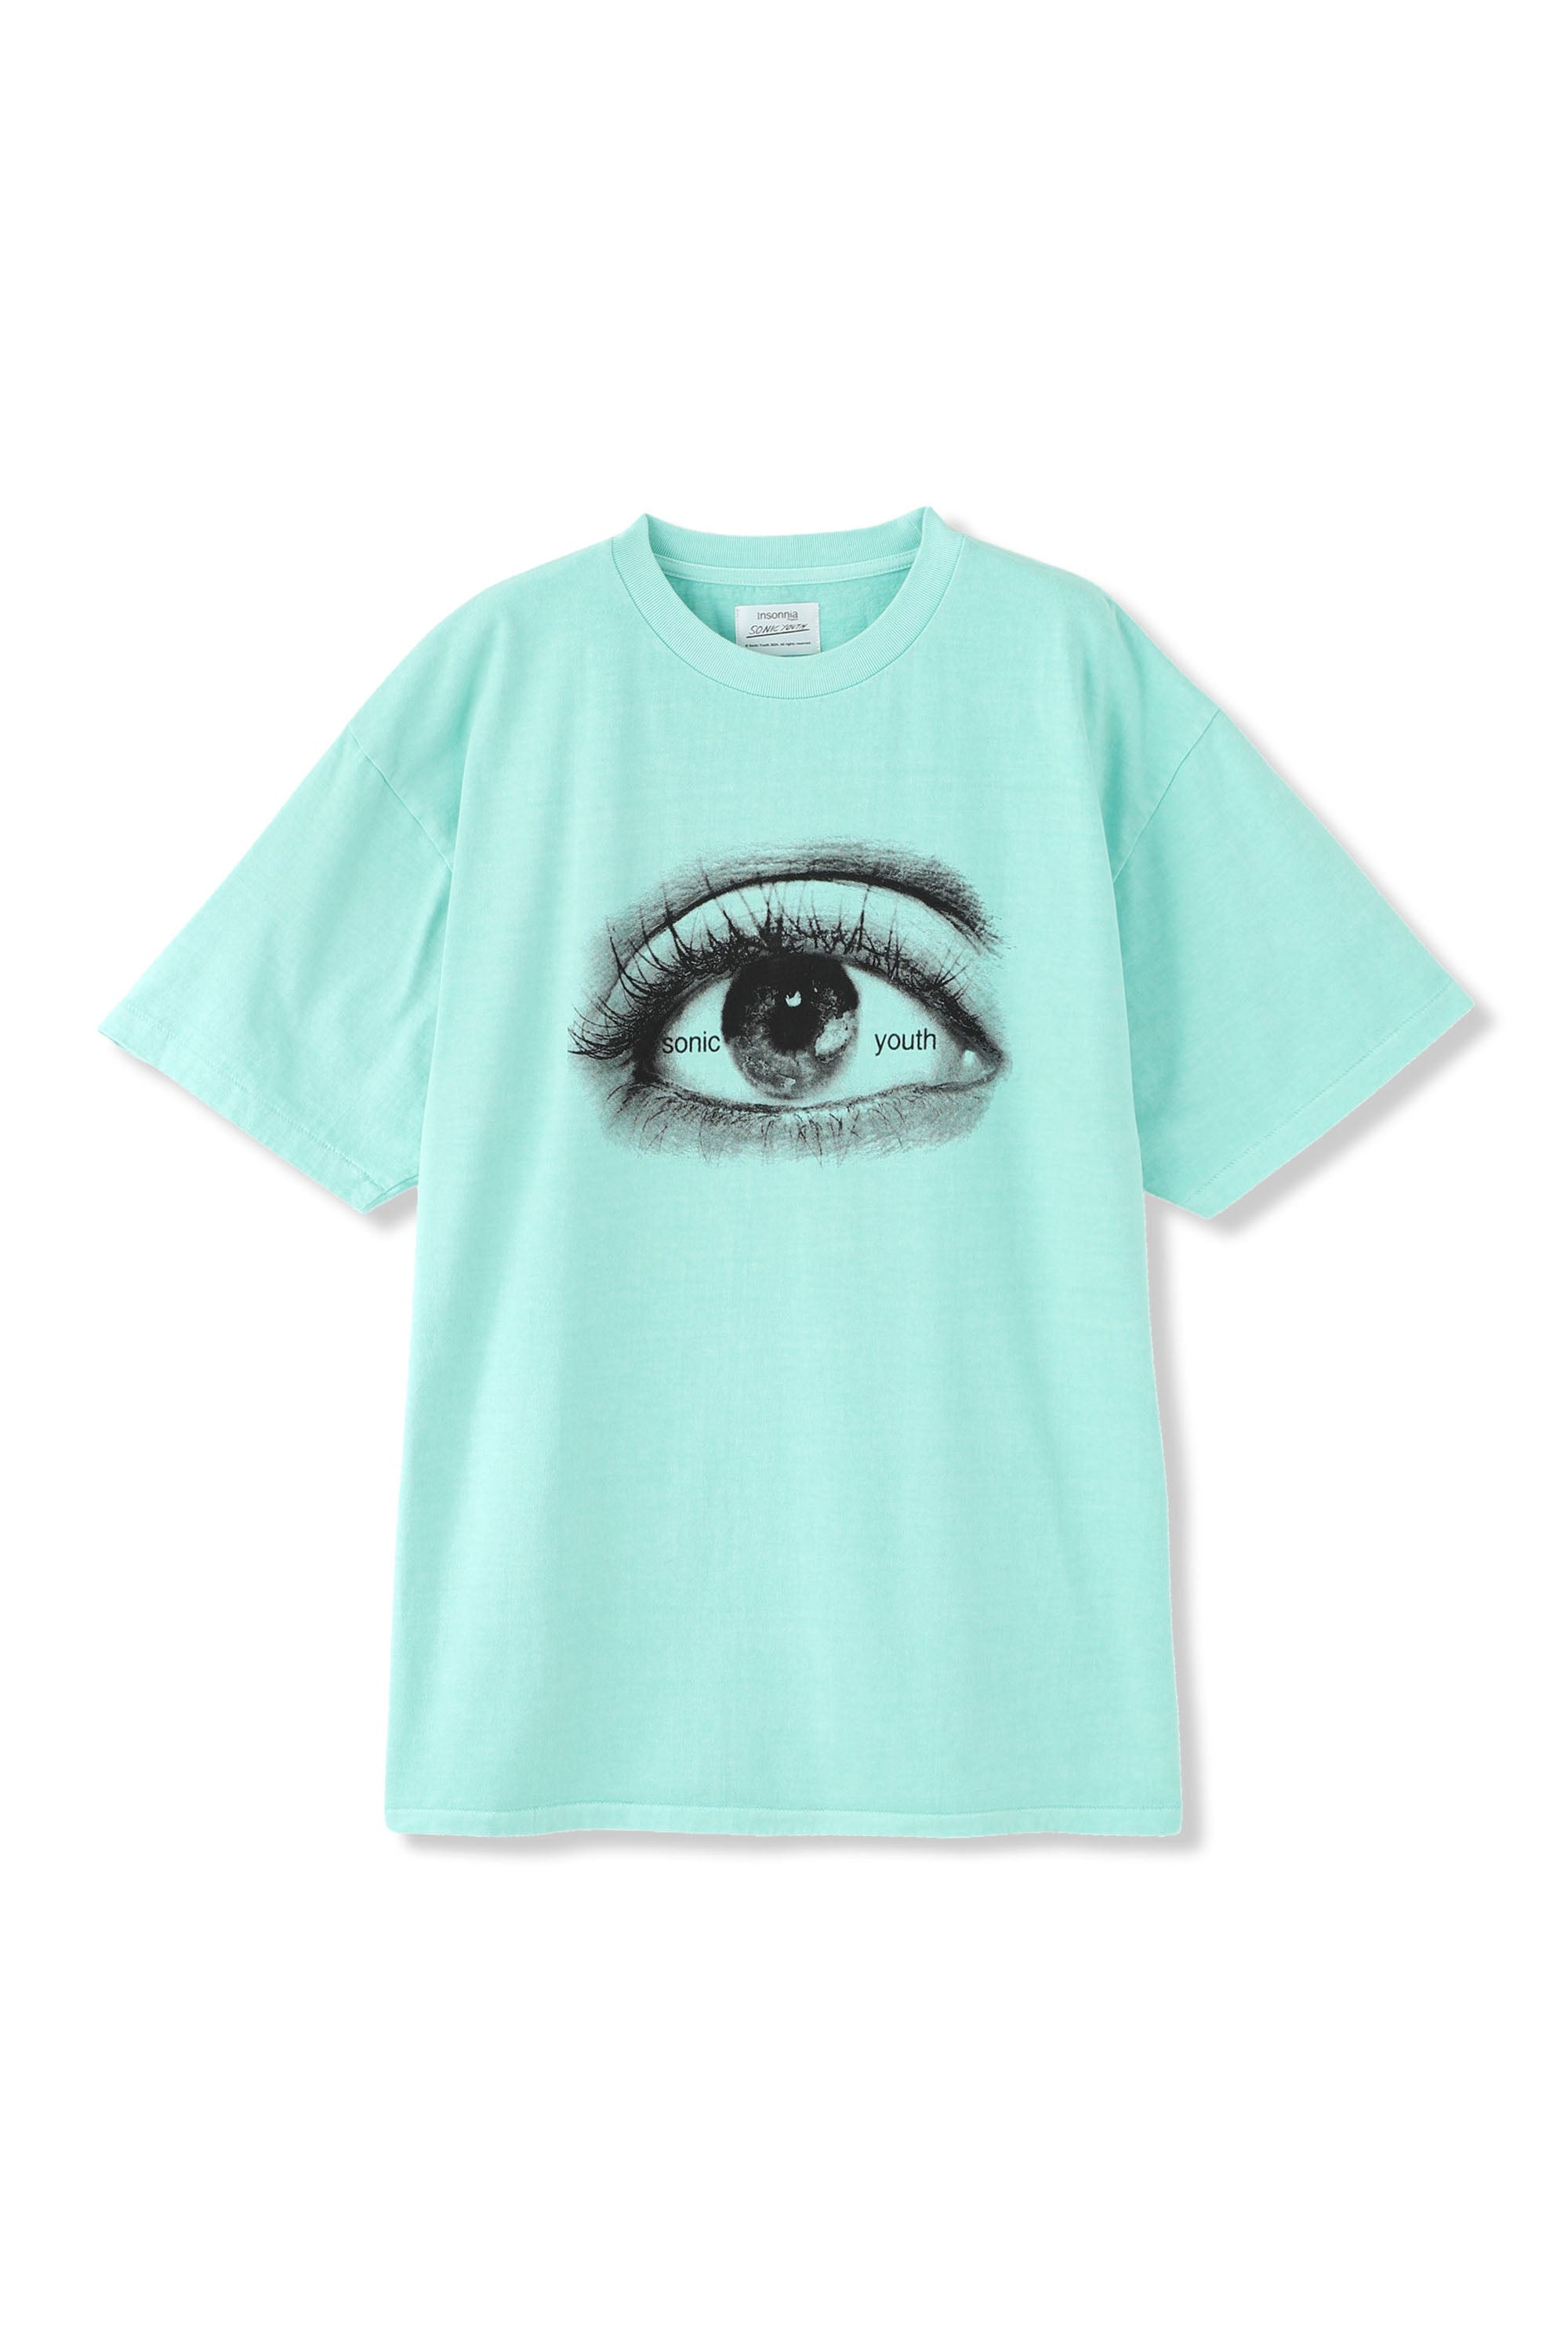 SONIC YOUTH EYE TEE TURQUOISE – Insonnia Projects